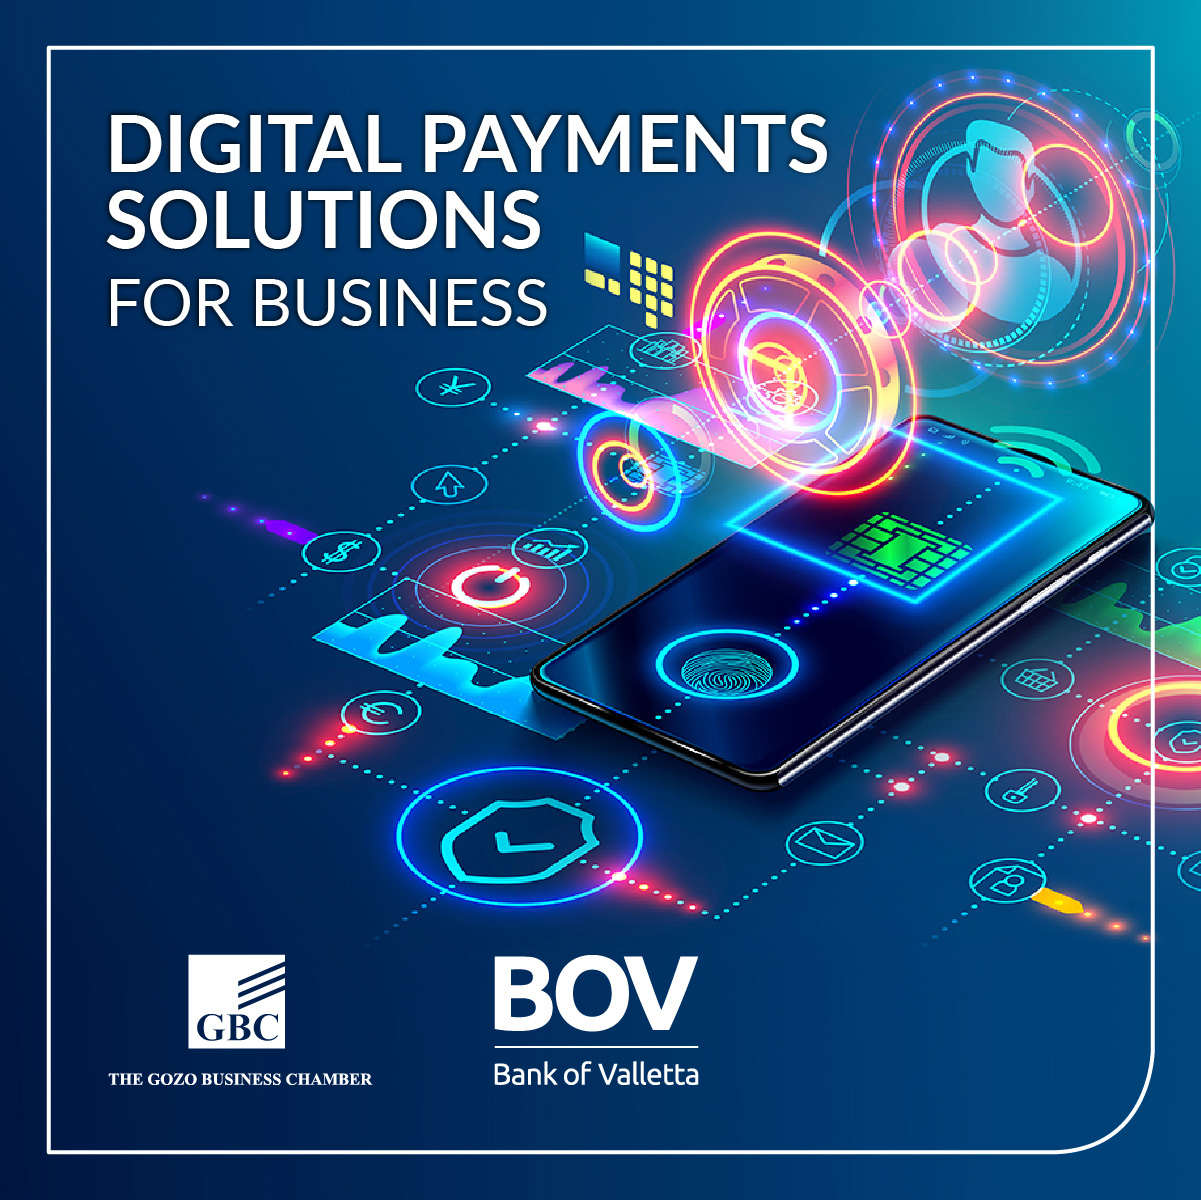 Embracing Digitisation and Digital Payments discussed by BOV and the GBC